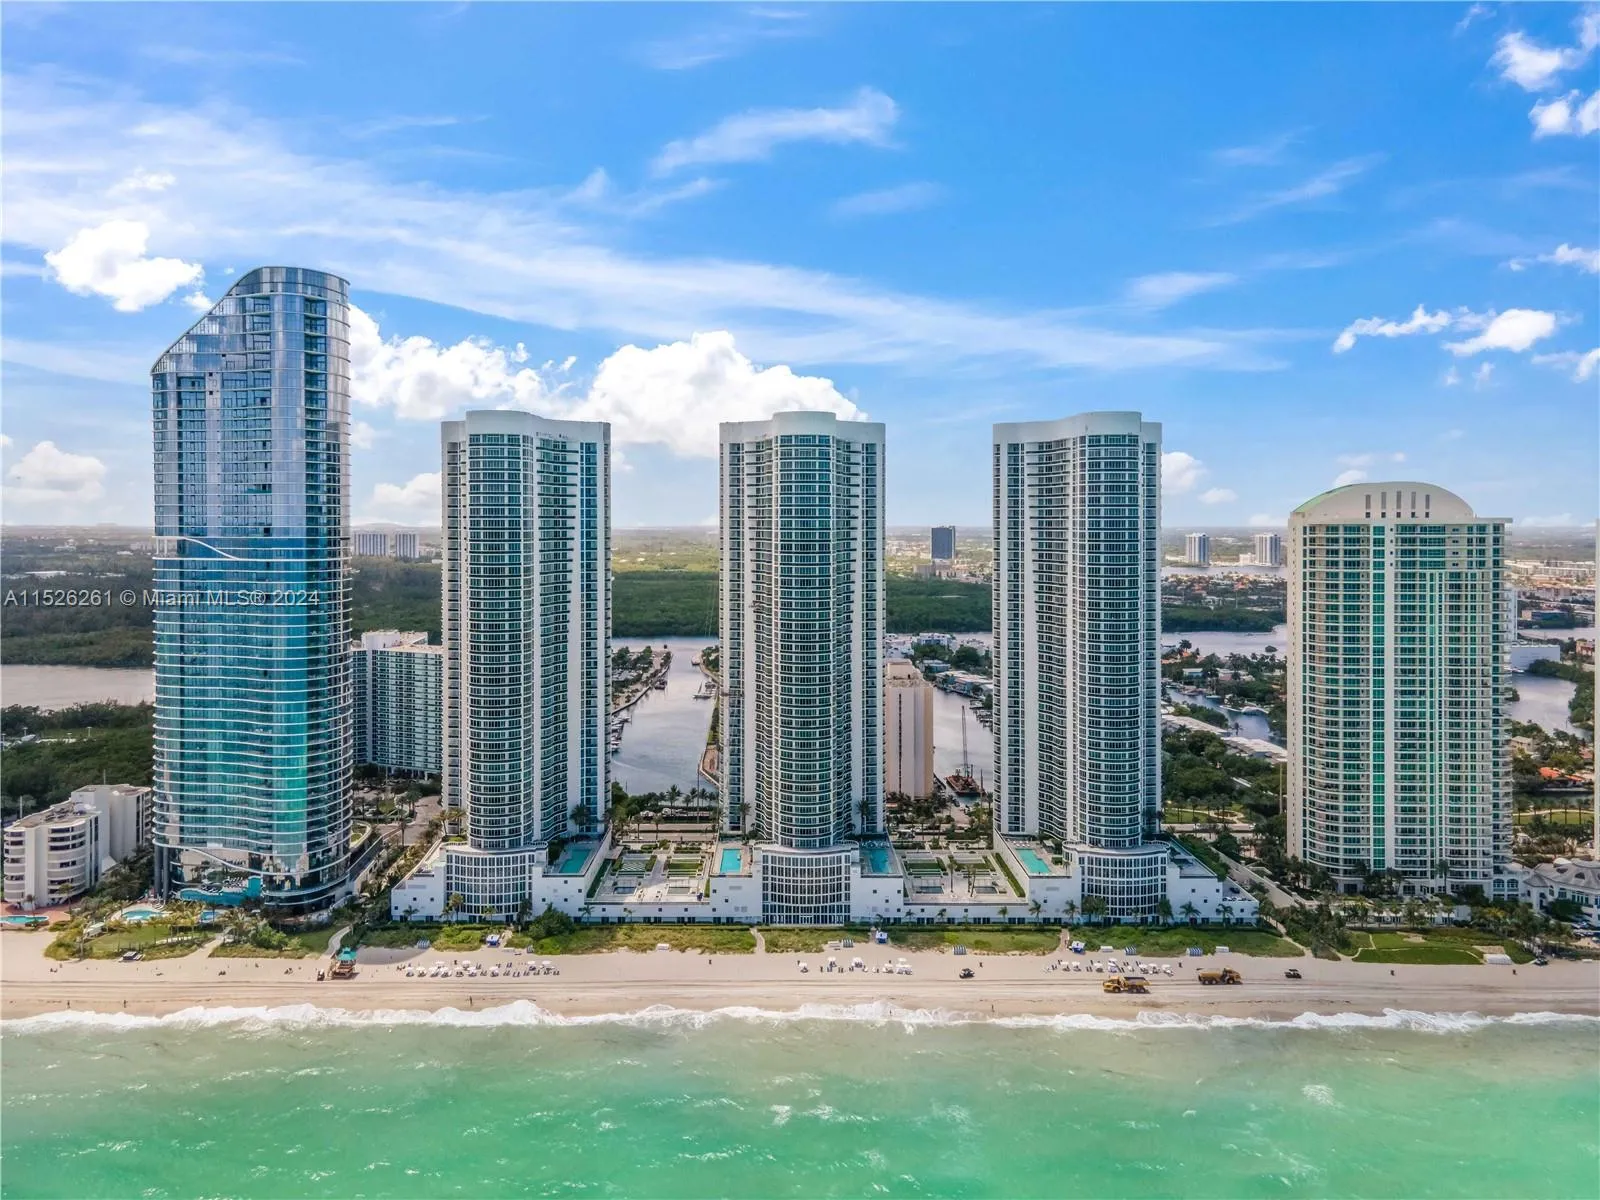 The Breathtaking & Extensive Trump Towers Beachfront